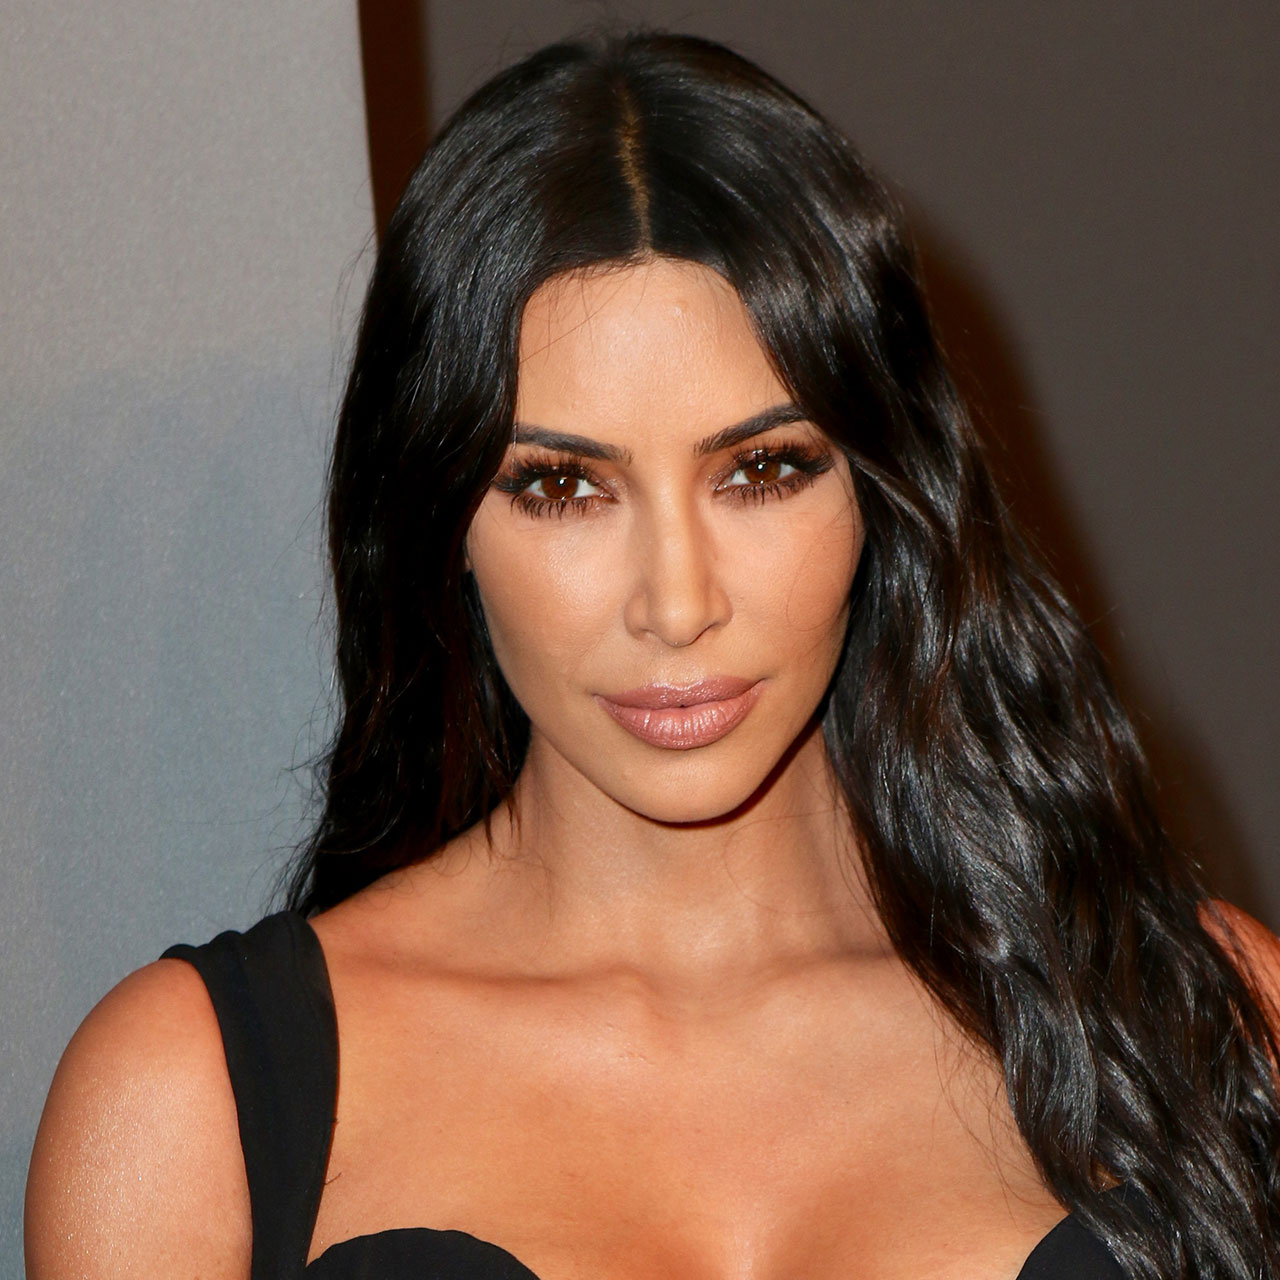 Kim Kardashian Jokes That Her Family 'Scammed the System' To Become Famous:  'We Aren't Supposed to Be Here' - SHEfinds